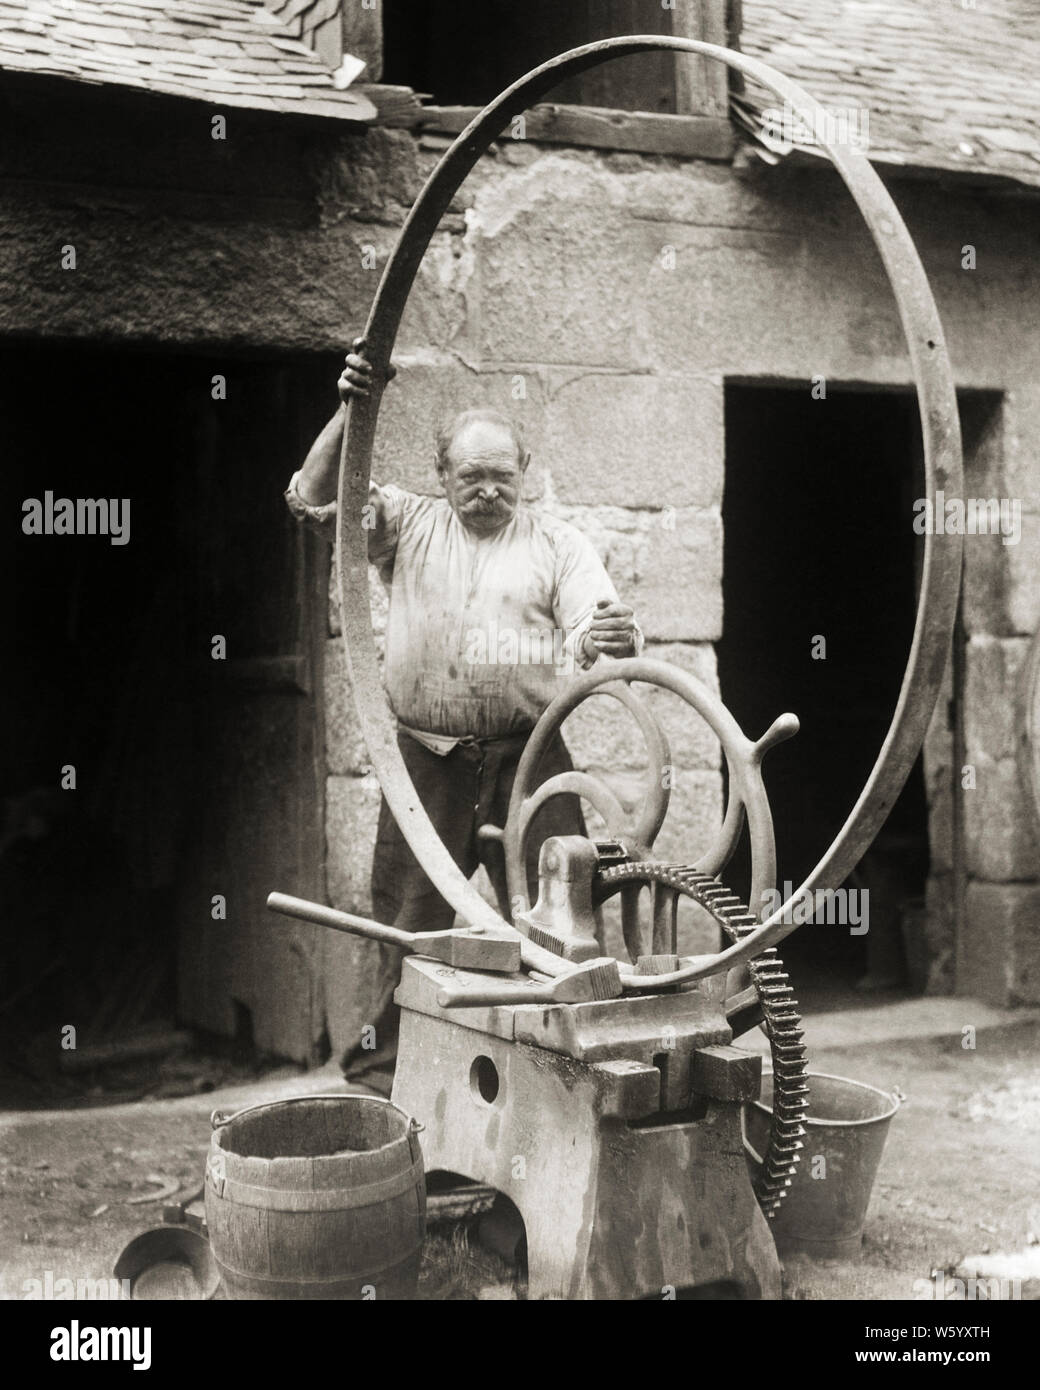 1920s MAN MILLWRIGHT OR BLACKSMITH BENDING LARGE ROUND IRON HOOP REINFORCING BAND FOR A WINE STORAGE BARREL BRITTANY FRANCE  - r4423 HAR001 HARS PROFESSION CRAFT BARREL SHAPE EUROPE MIDDLE-AGED B&W MIDDLE-AGED MAN BENDING SKILL OCCUPATION SKILLS GEARS EUROPEAN MACHINERY STRENGTH CAREERS EXTERIOR KNOWLEDGE POWERFUL BLACKSMITH LABOR A AUTHORITY EMPLOYMENT OCCUPATIONS CIRCULAR STYLISH EMPLOYEE OR BRITTANY CRAFTSMAN CREATIVITY REINFORCING BLACK AND WHITE CAUCASIAN ETHNICITY HAR001 LABORING OLD FASHIONED Stock Photo